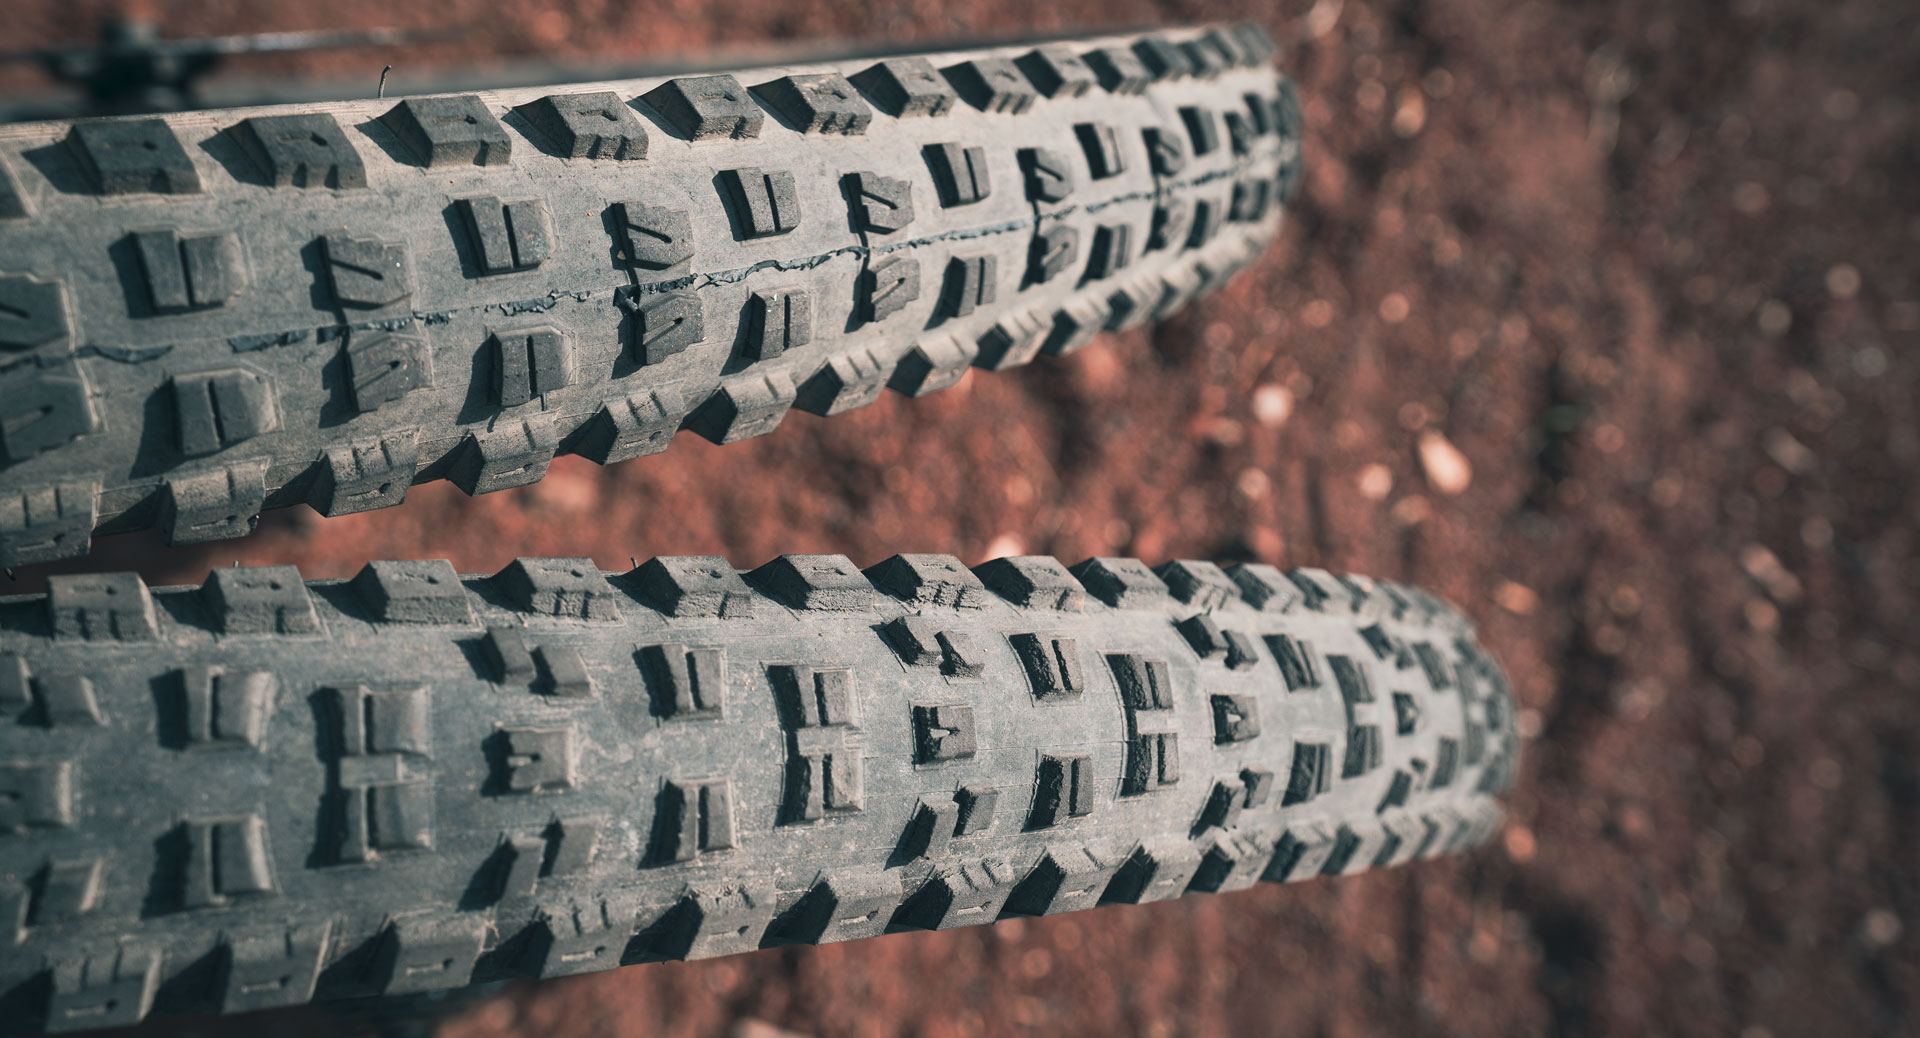 SPECIALIZED ELIMINATOR / BUTCHER TIRE COMBO REVIEW